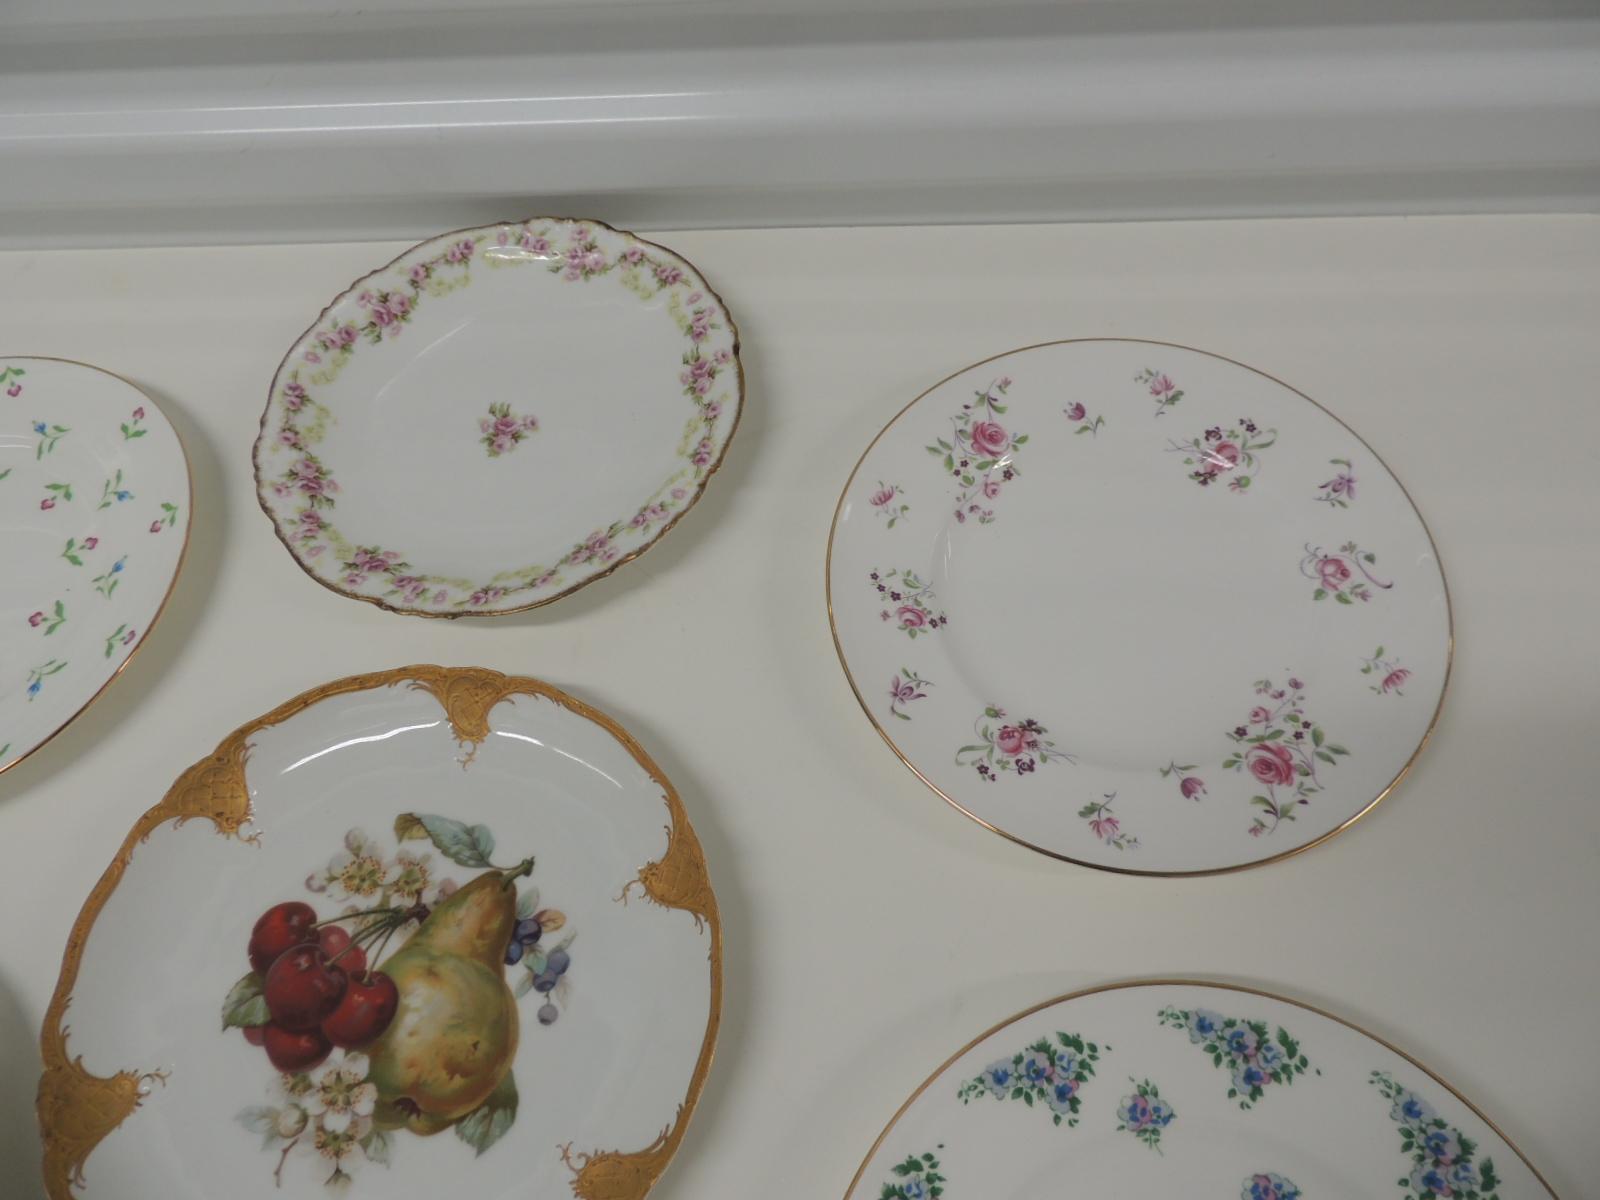 Set of '7' Collection of Porcelain Dessert Plates
From Left:
#1
Royal Victoria English White and Black Bone China Dessert Plate
Size: 8.5